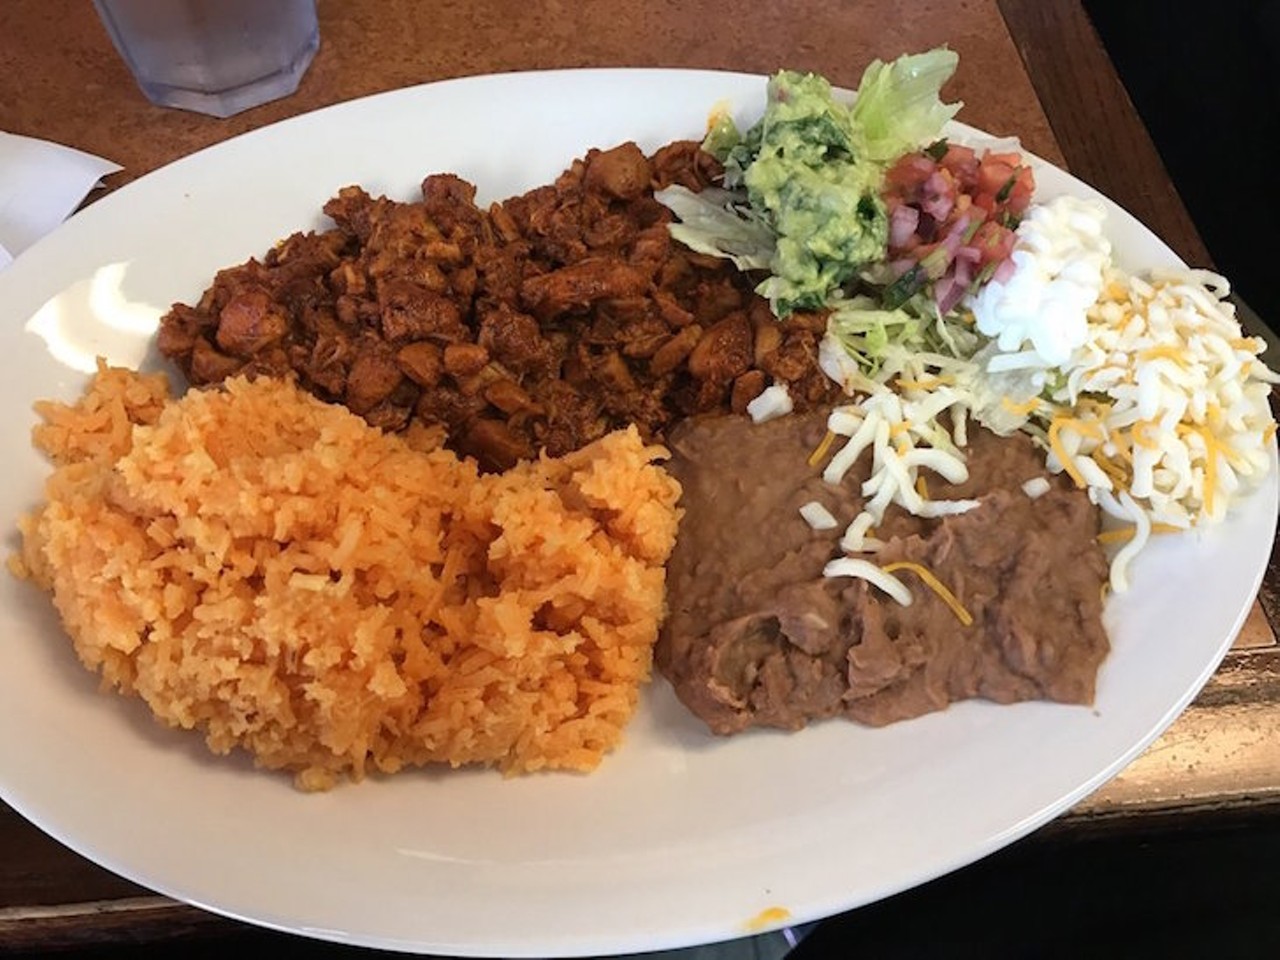 Border Grill Fresh-Mex
5695 Vineland Road Suite A, 407-352-0101
4.5 stars, 1023 reviews
&#147;We stopped by this little hole in the wall restaurant because of the great Yelp reviews. The service was quick and nice, the food was delicious and the aroma as you walk in is so good. Great food will repeat.&#148; --Darrin B.
Photo via Border Grill Fresh-Mex